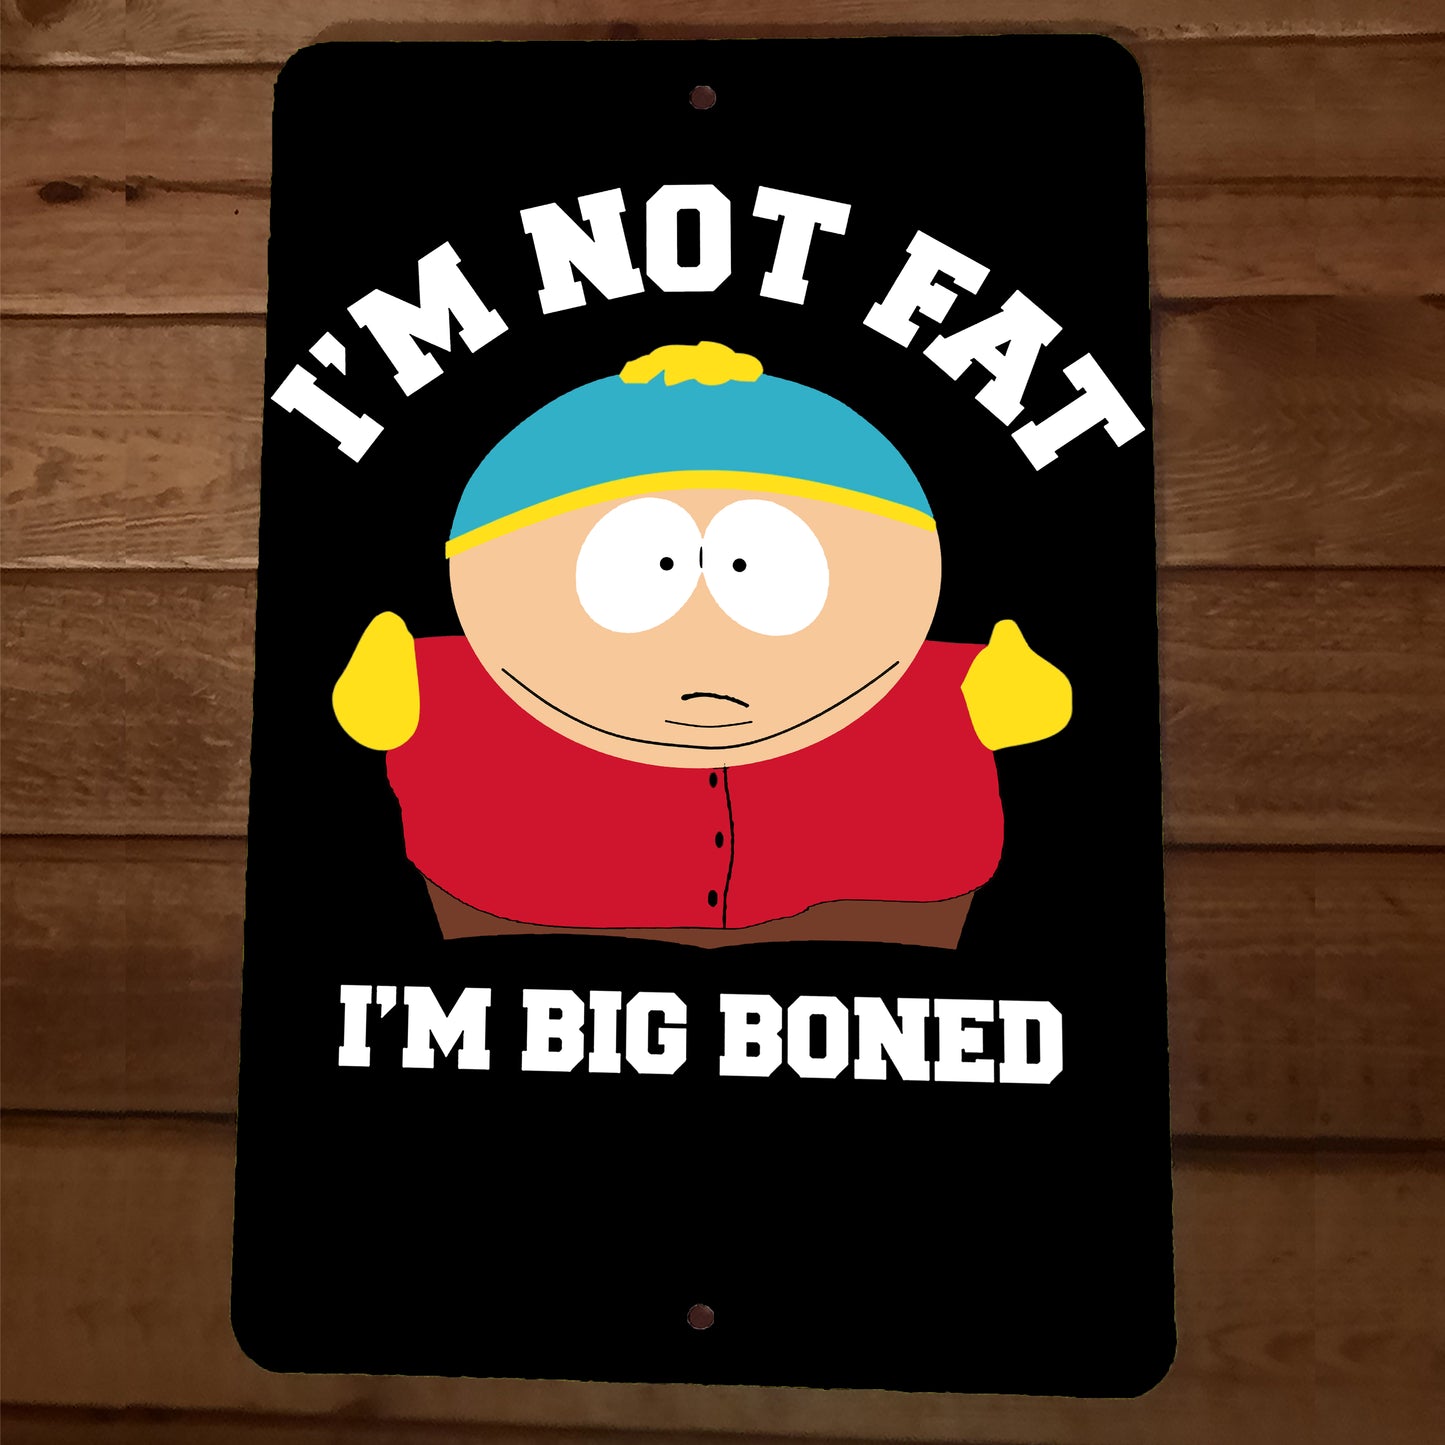 Bundle of Bad Boys 5 South Park 8x12 Metal Wall Signs and Mouse Pad